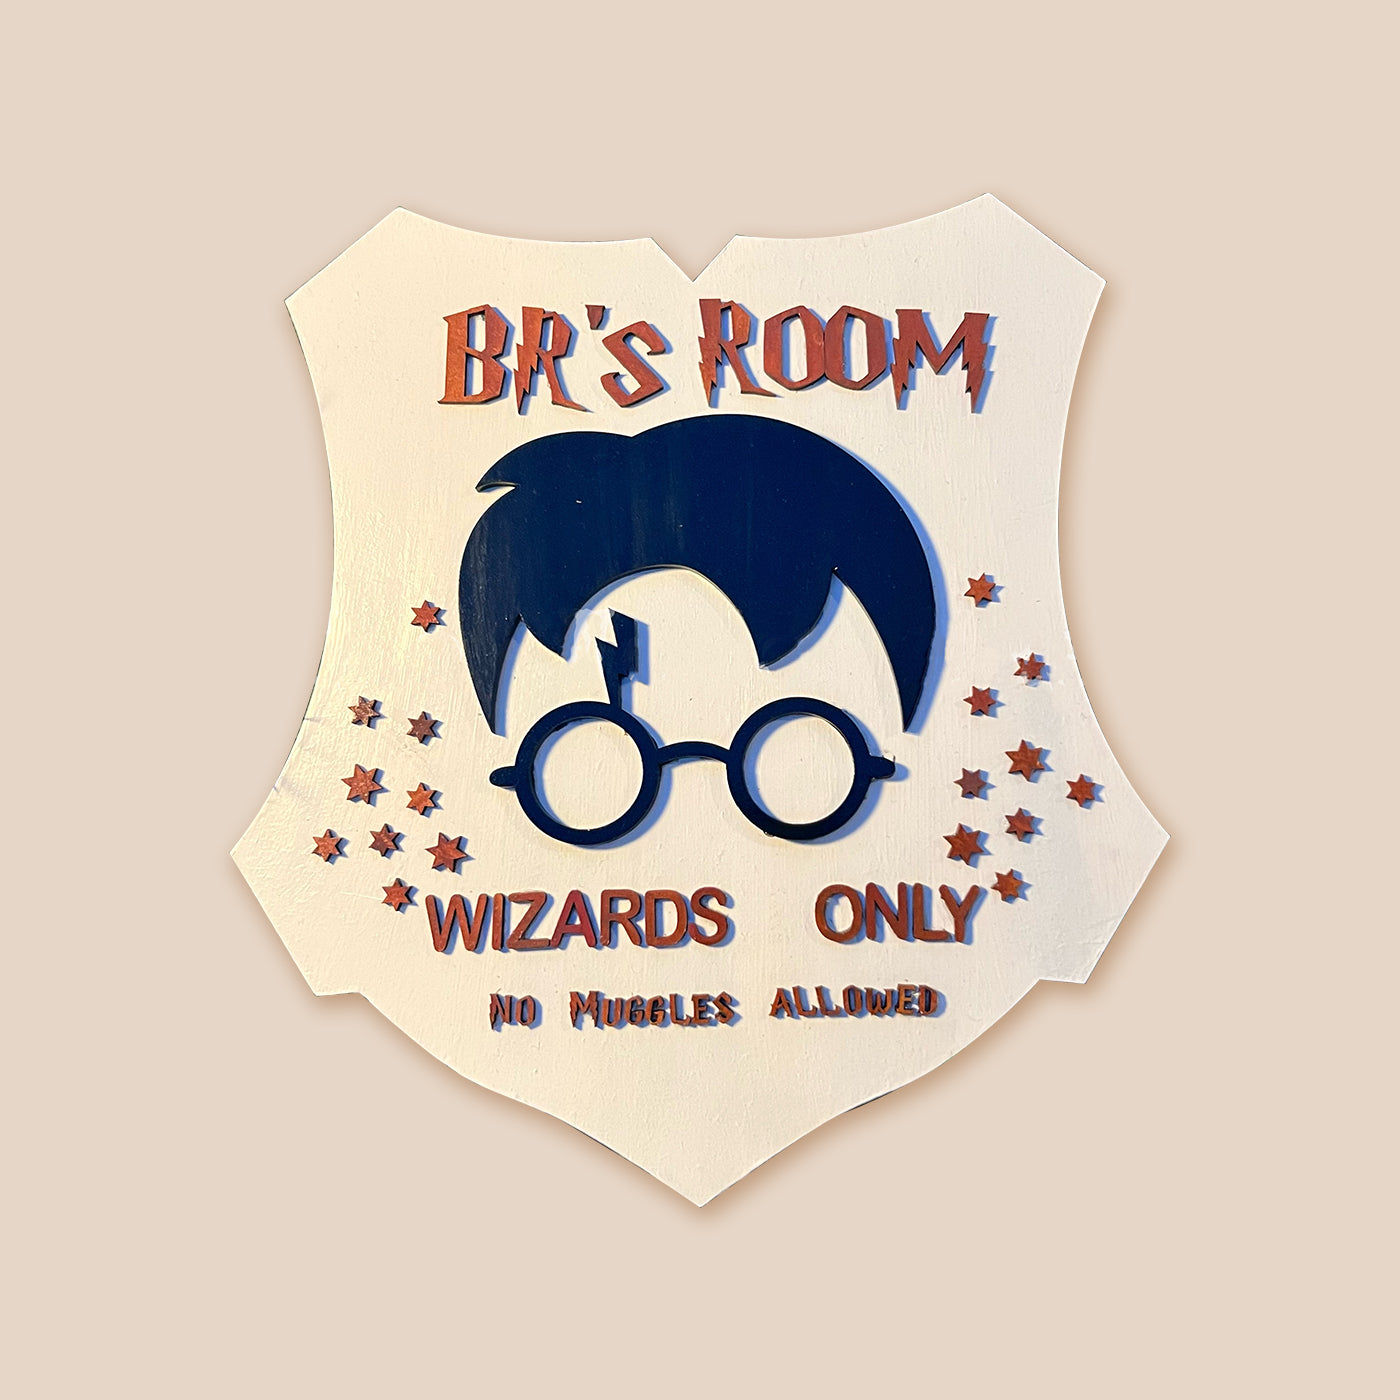 Harry Potter Wizards Muggles Name Plate – Can be personalized